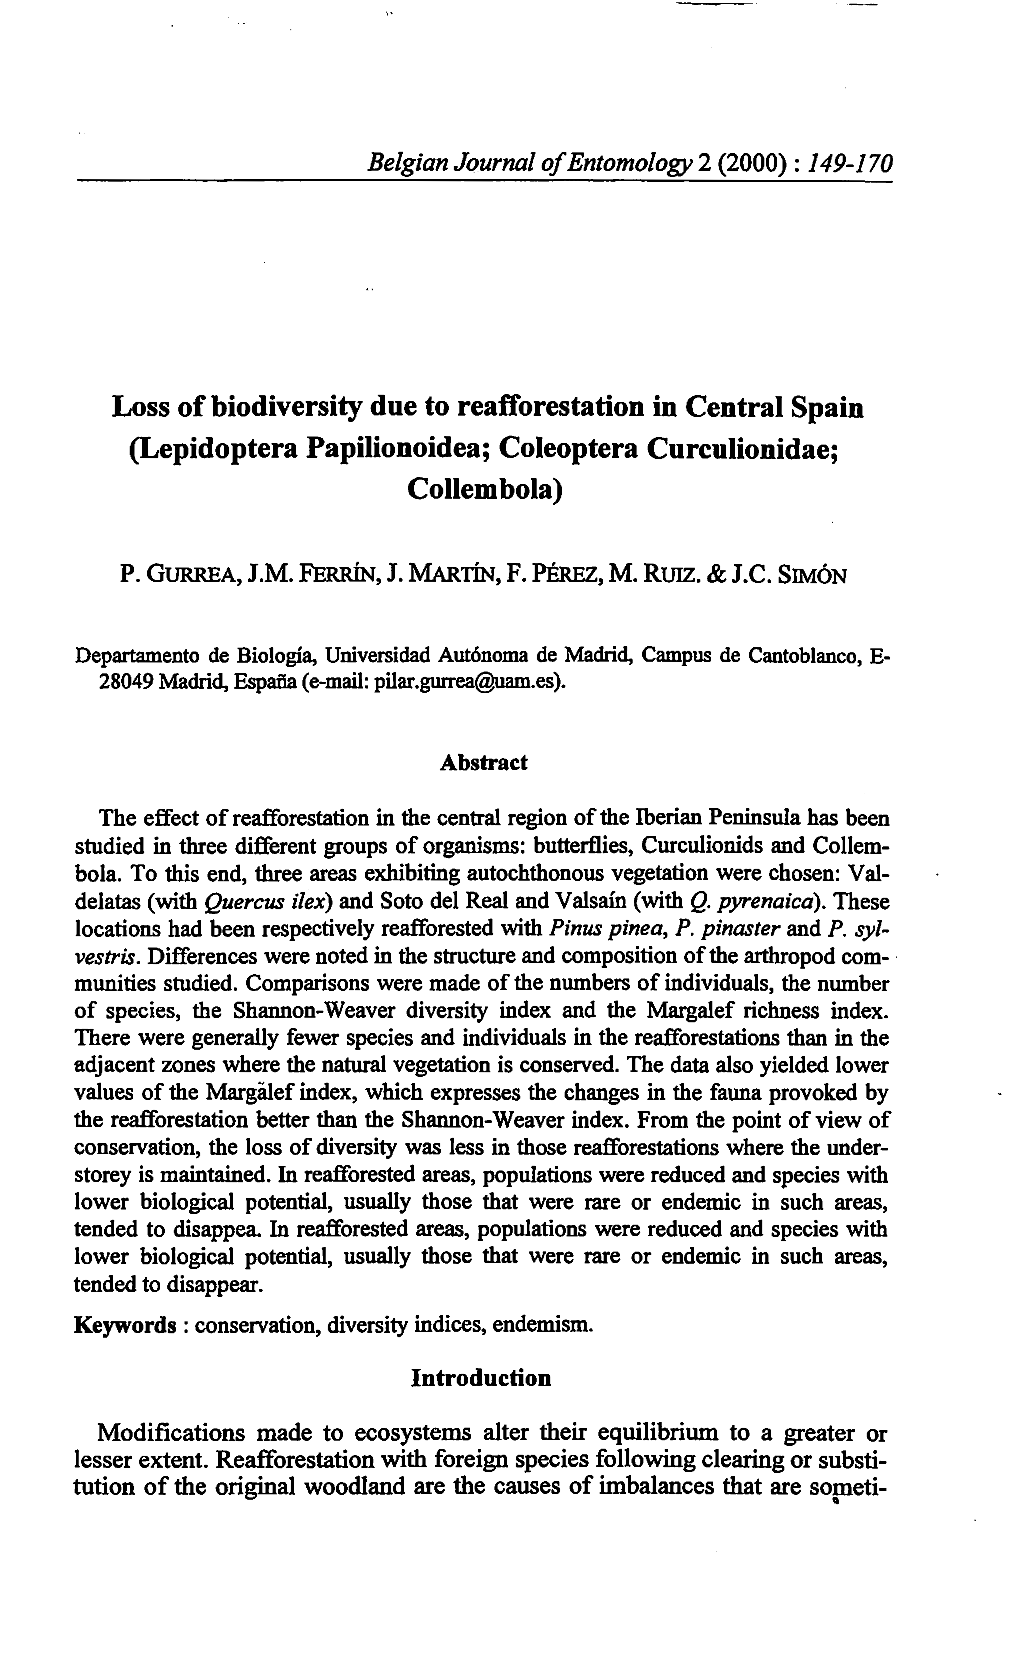 Loss of Biodiversity Due to Reafforestation in Central Spain (Lepidoptera Papilionoidea; Coleoptera Curculionidae; Collembola)